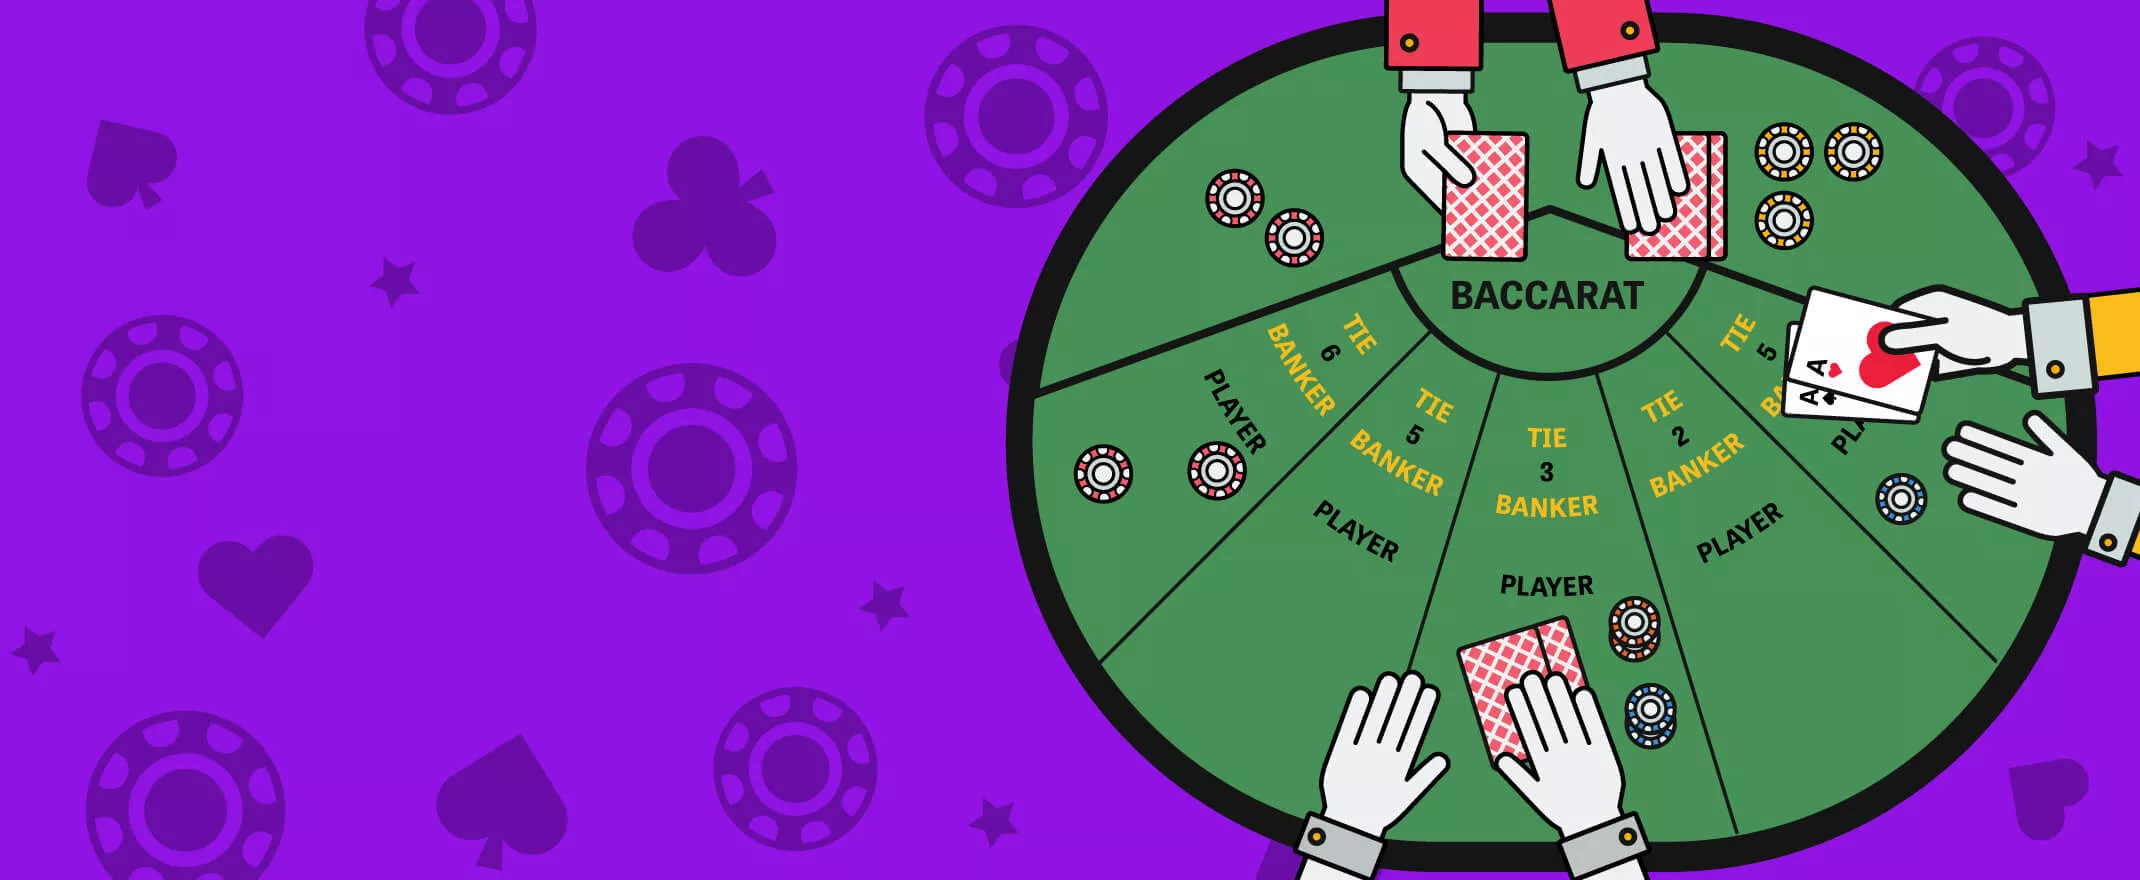 Online baccarat: The rules of the game